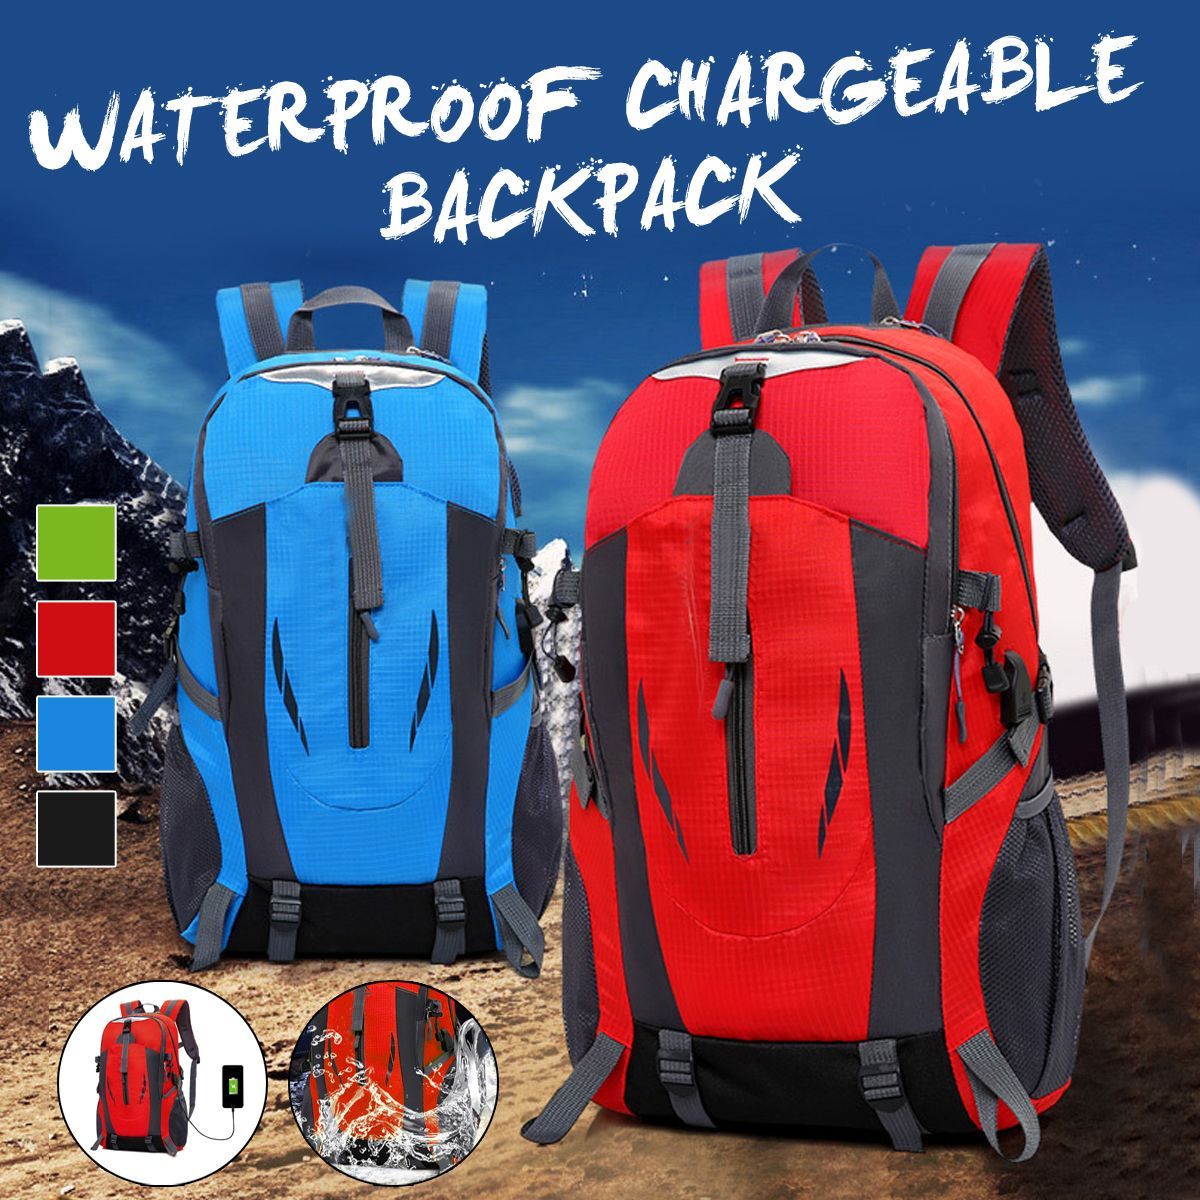 Water-proof-Backpack-Large-Capacity-USB-Charging-Corful-Outdoors-Travel-Laptop-Bag-for-156-inch-Note-1670591